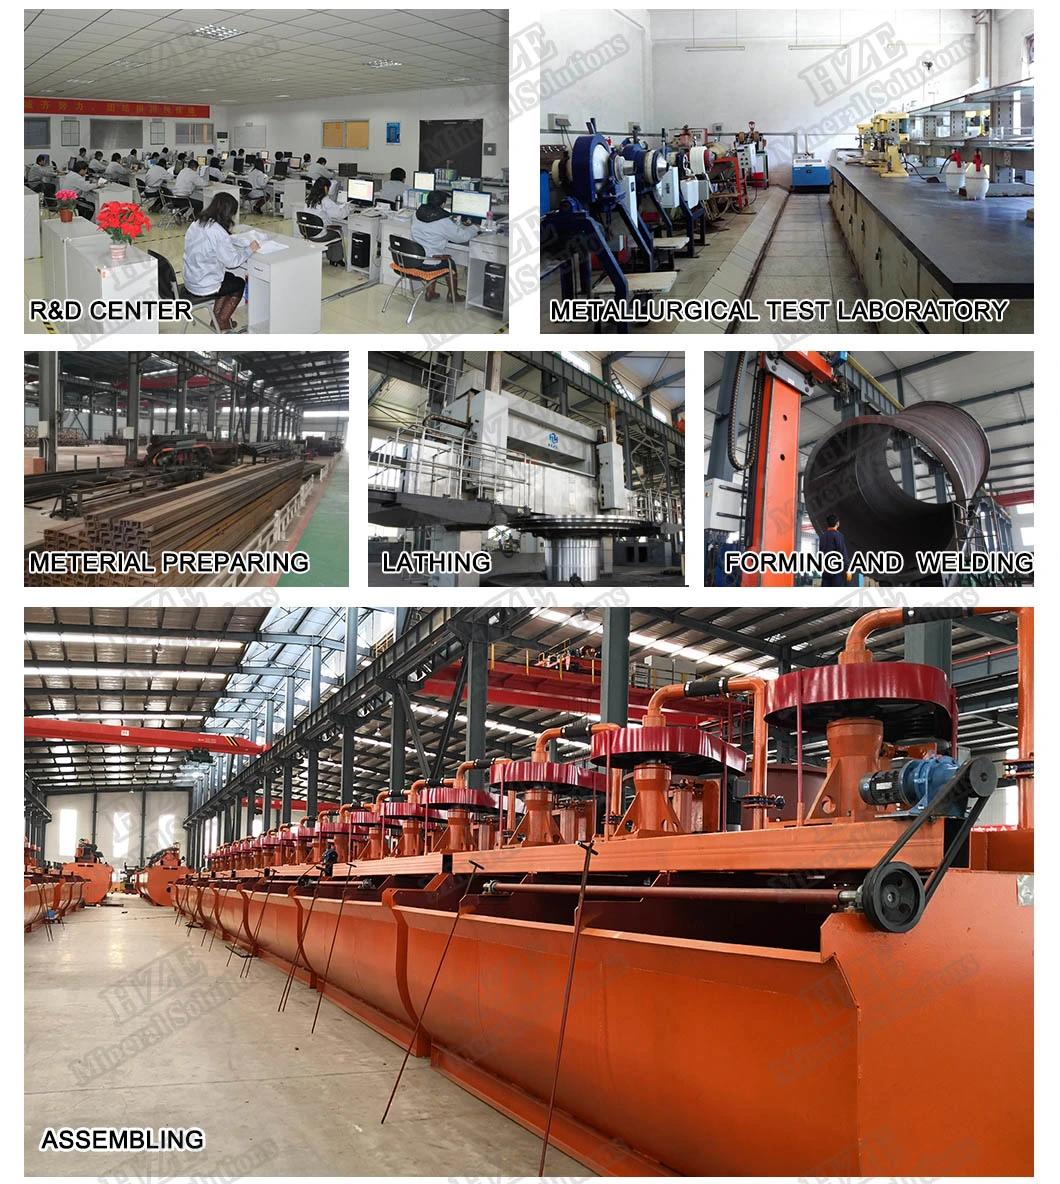 Iron Ore Processing Gangue Rejection Dry Drum Permanent Magnetic Head Pulley